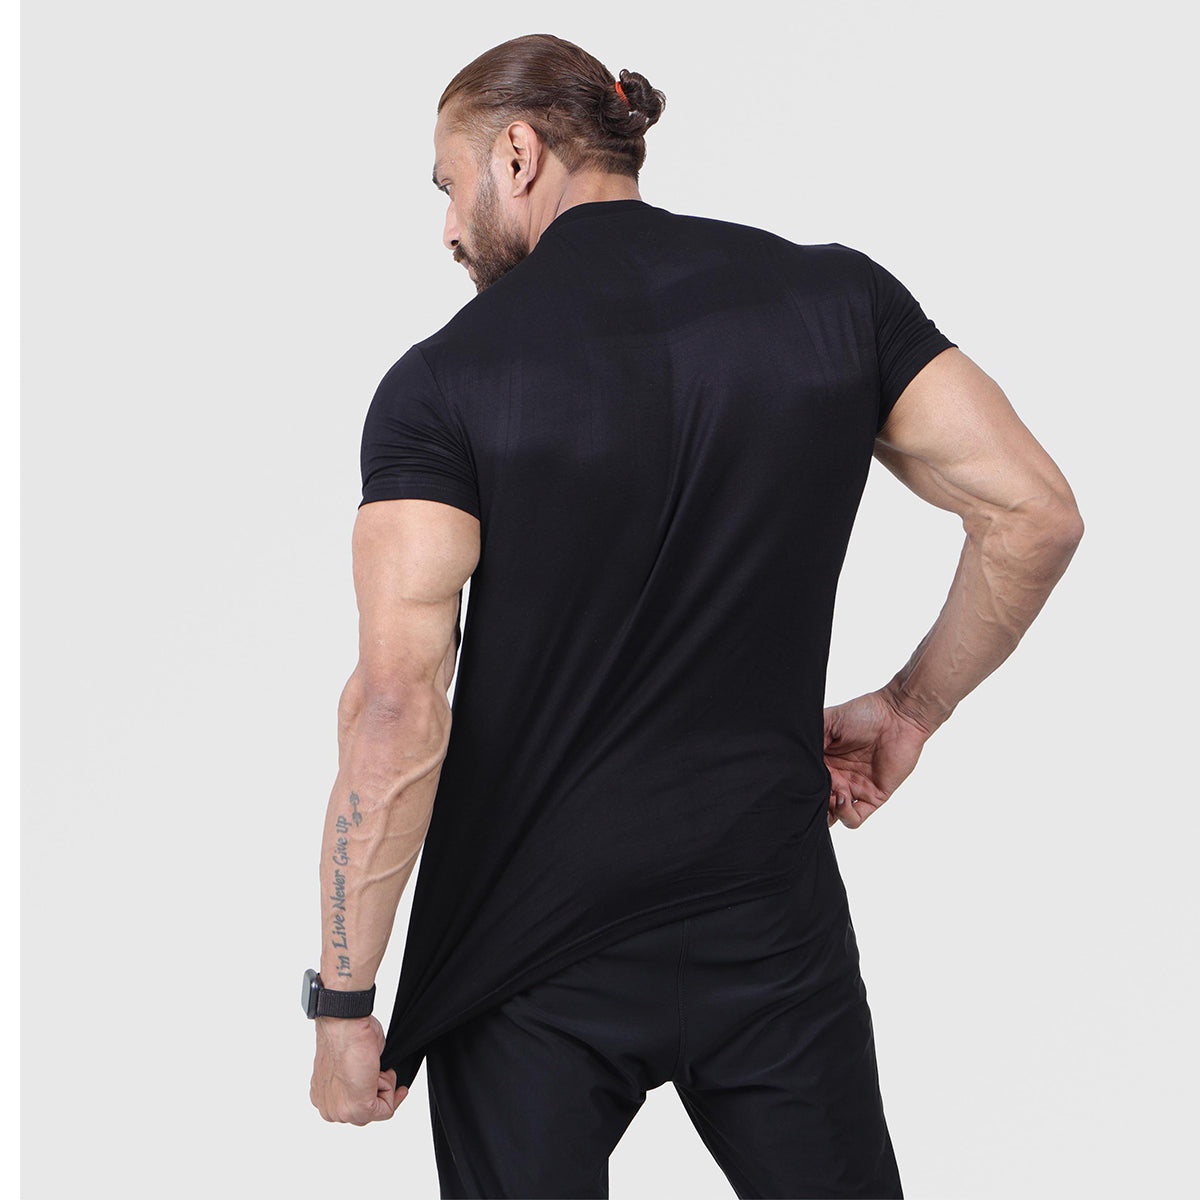 Black DUMBBELL Compression TEE